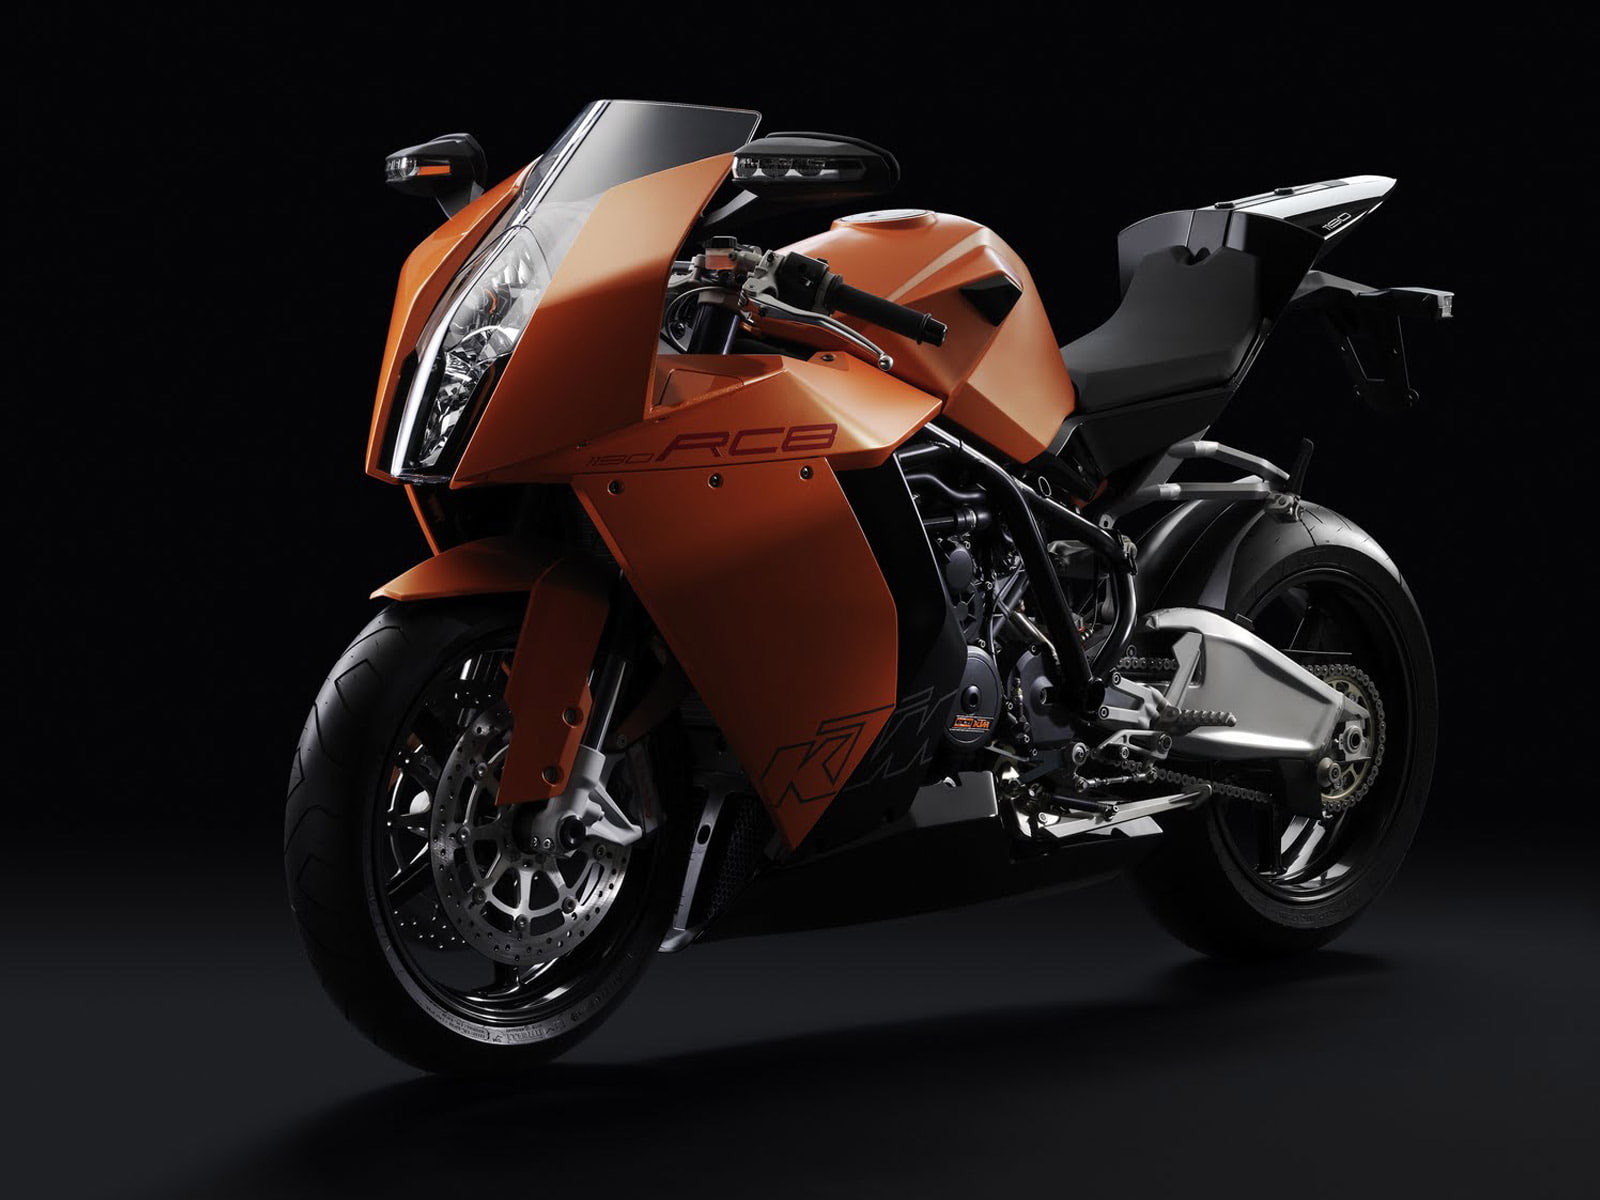 KTM 1190 RC8 HD, bikes, motorcycles, bikes and motorcycles